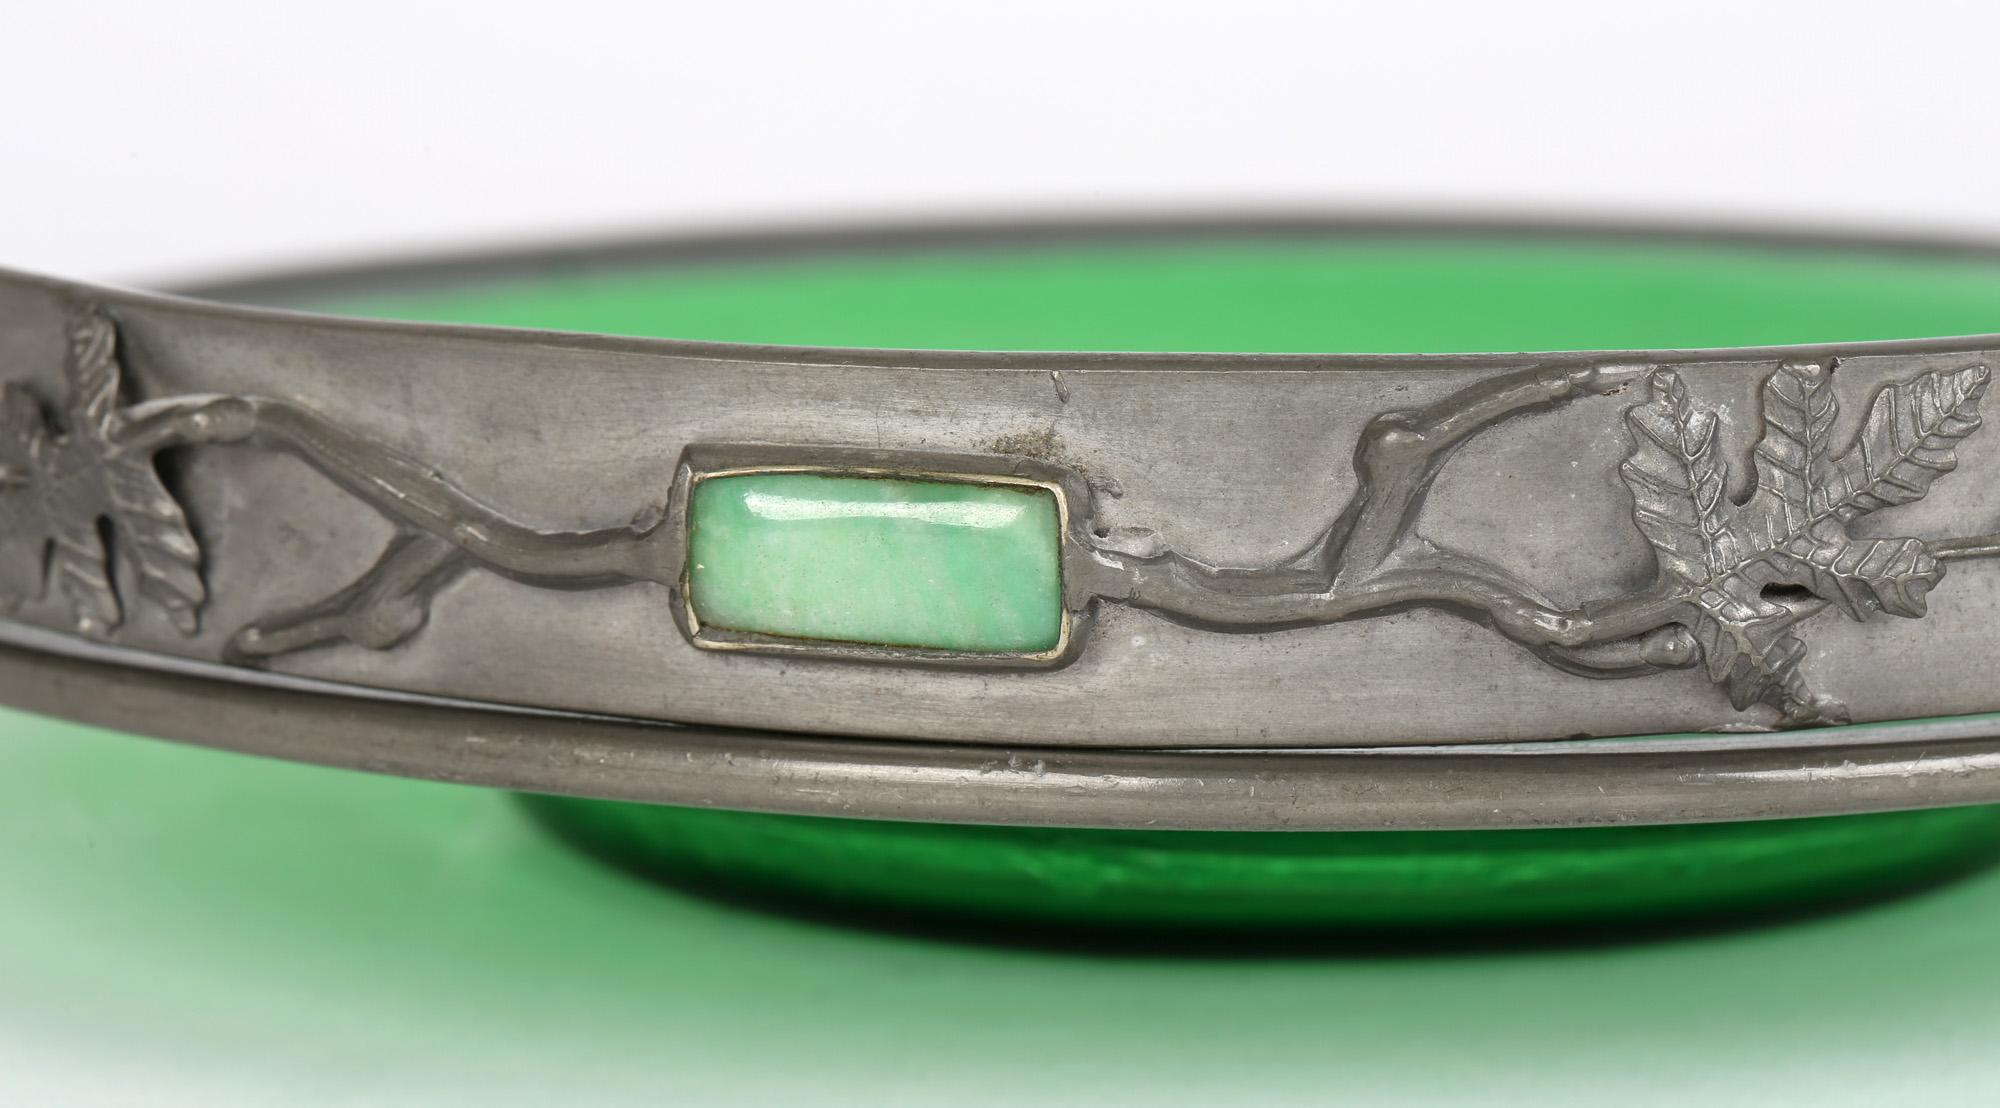 Unusual Arts & Crafts pewter mounted green glass dish, the swing handle inset with polished gem stones, dating from the early 20th century. This finely made quality dish has a mottled blown green glass rounded dish with recessed centre set within a